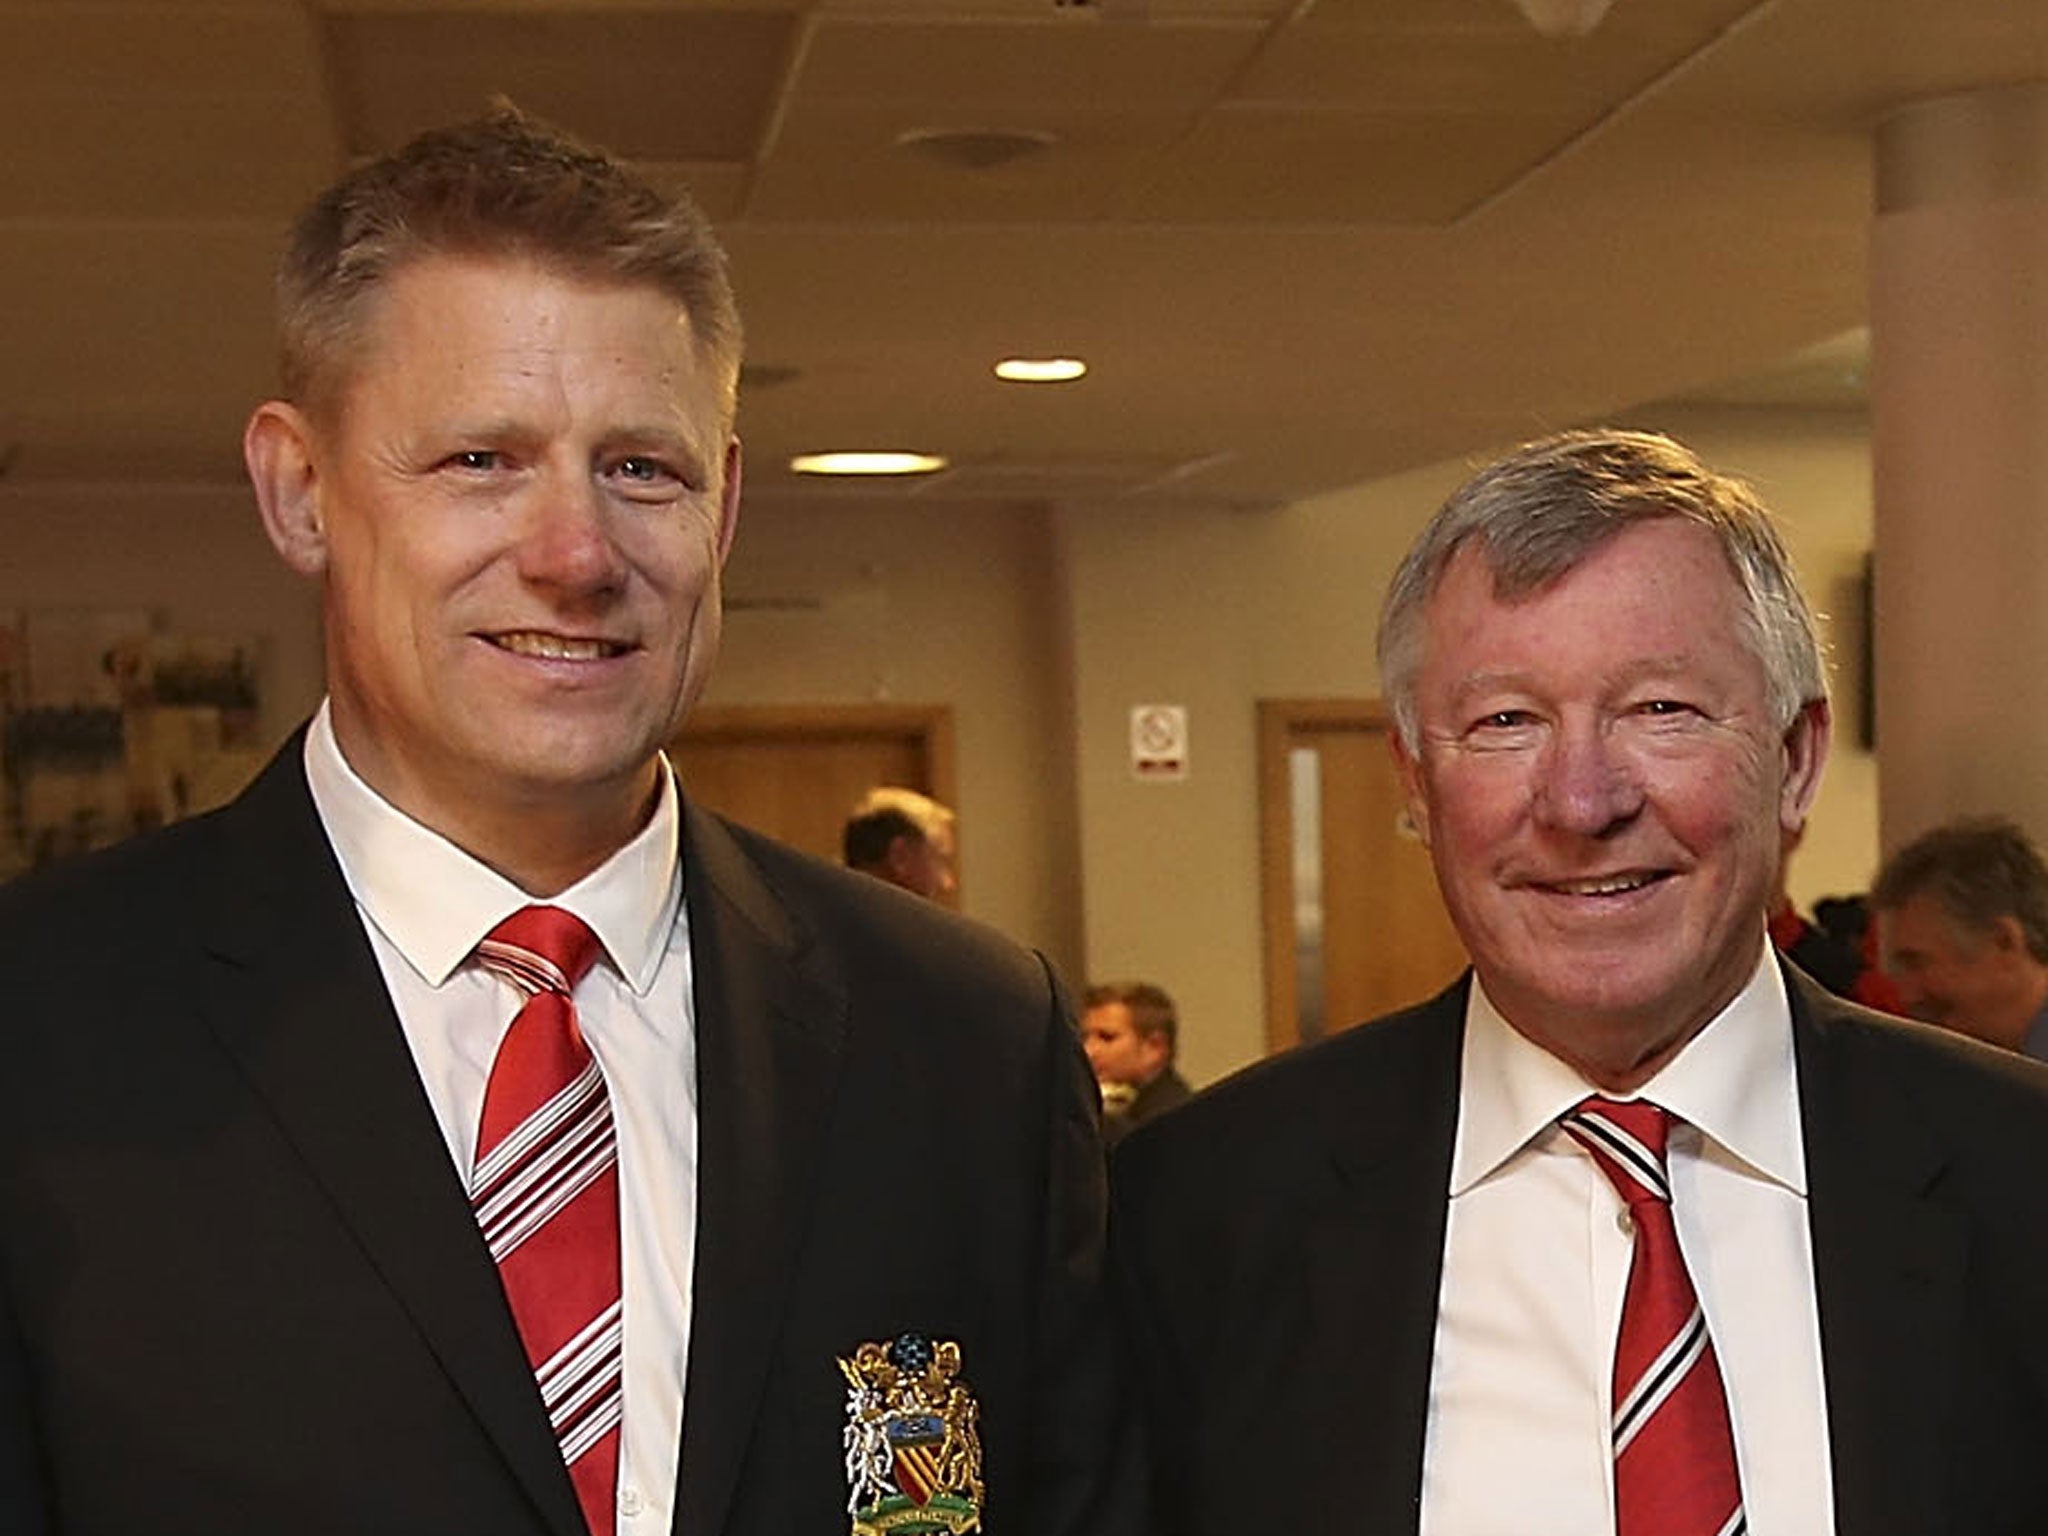 Peter Schmeichel (left) poses with his former manager at Manchester United, Sir Alex Ferguson